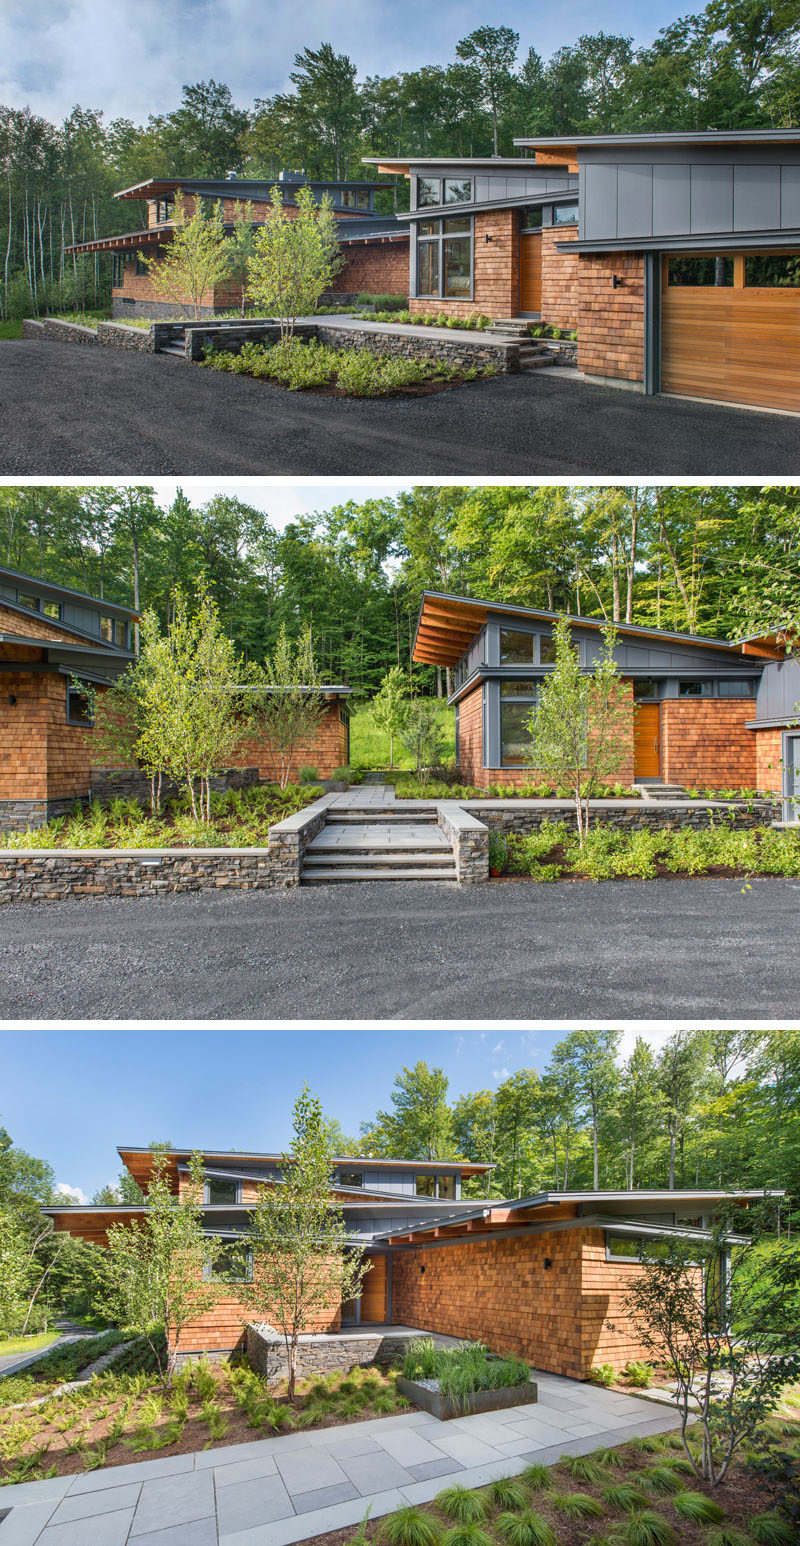 This modern house, which is discreetly set back from the road, is split into two sections, the main house on the left, and the guest house and garage on the right. When approaching the house, you're greeted by modern landscaping and can see through to the woods behind the house.